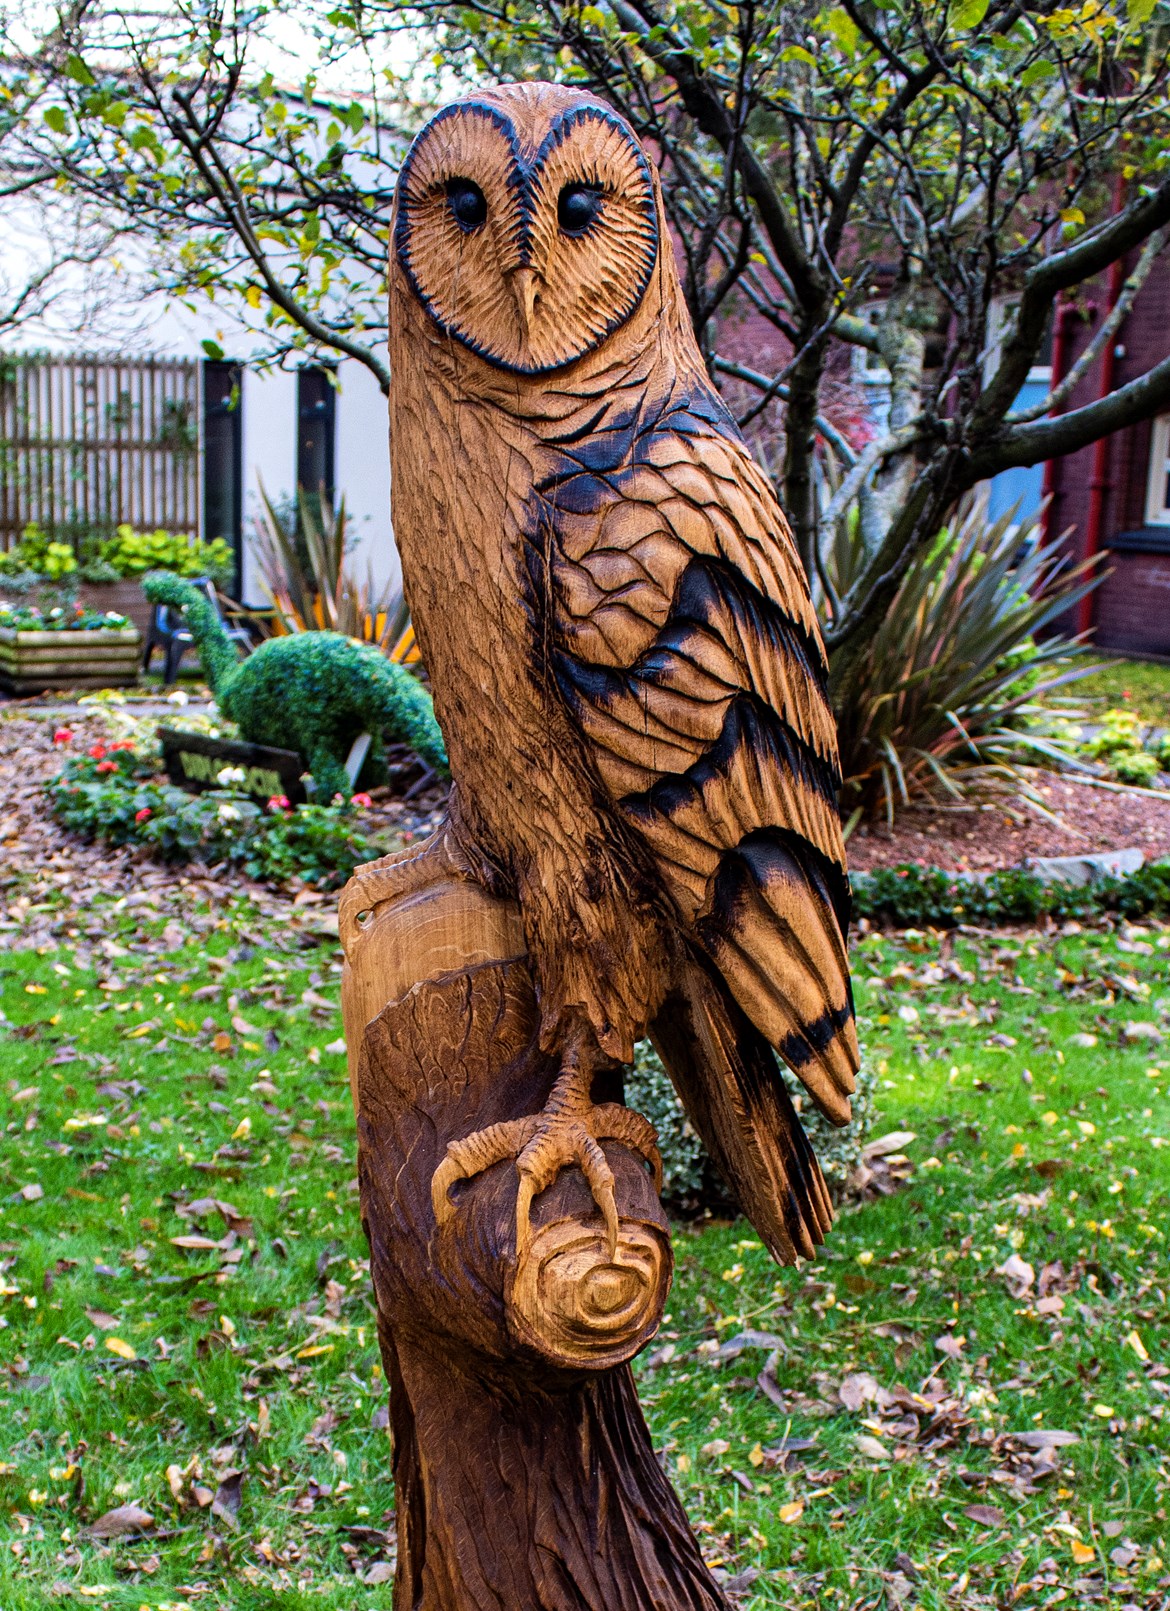 HS2 contractor LMJV donates owl sculpture and £10,000 to Birmingham Children’s Hospital: Owl carving donated to Birmingham Children's Hospital 